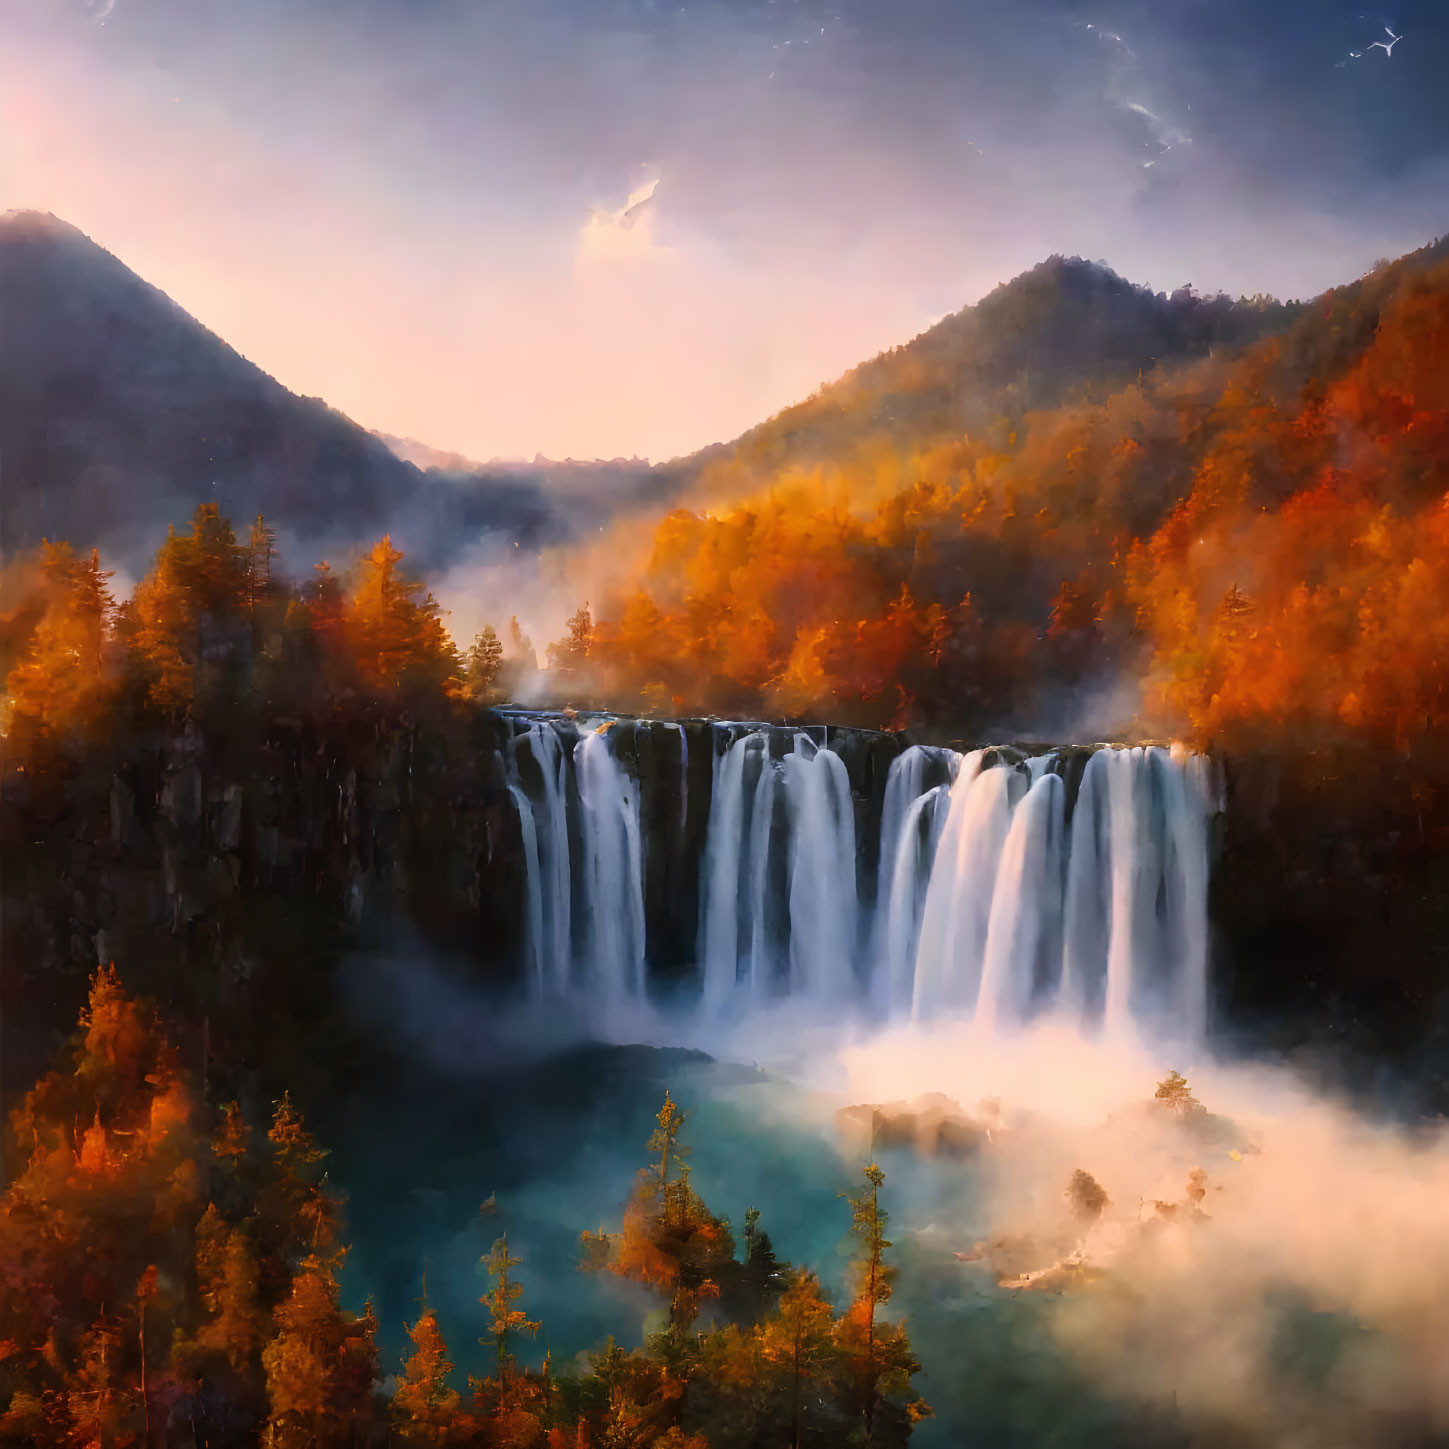 Scenic waterfall in misty lagoon with autumn forests and mountains at twilight